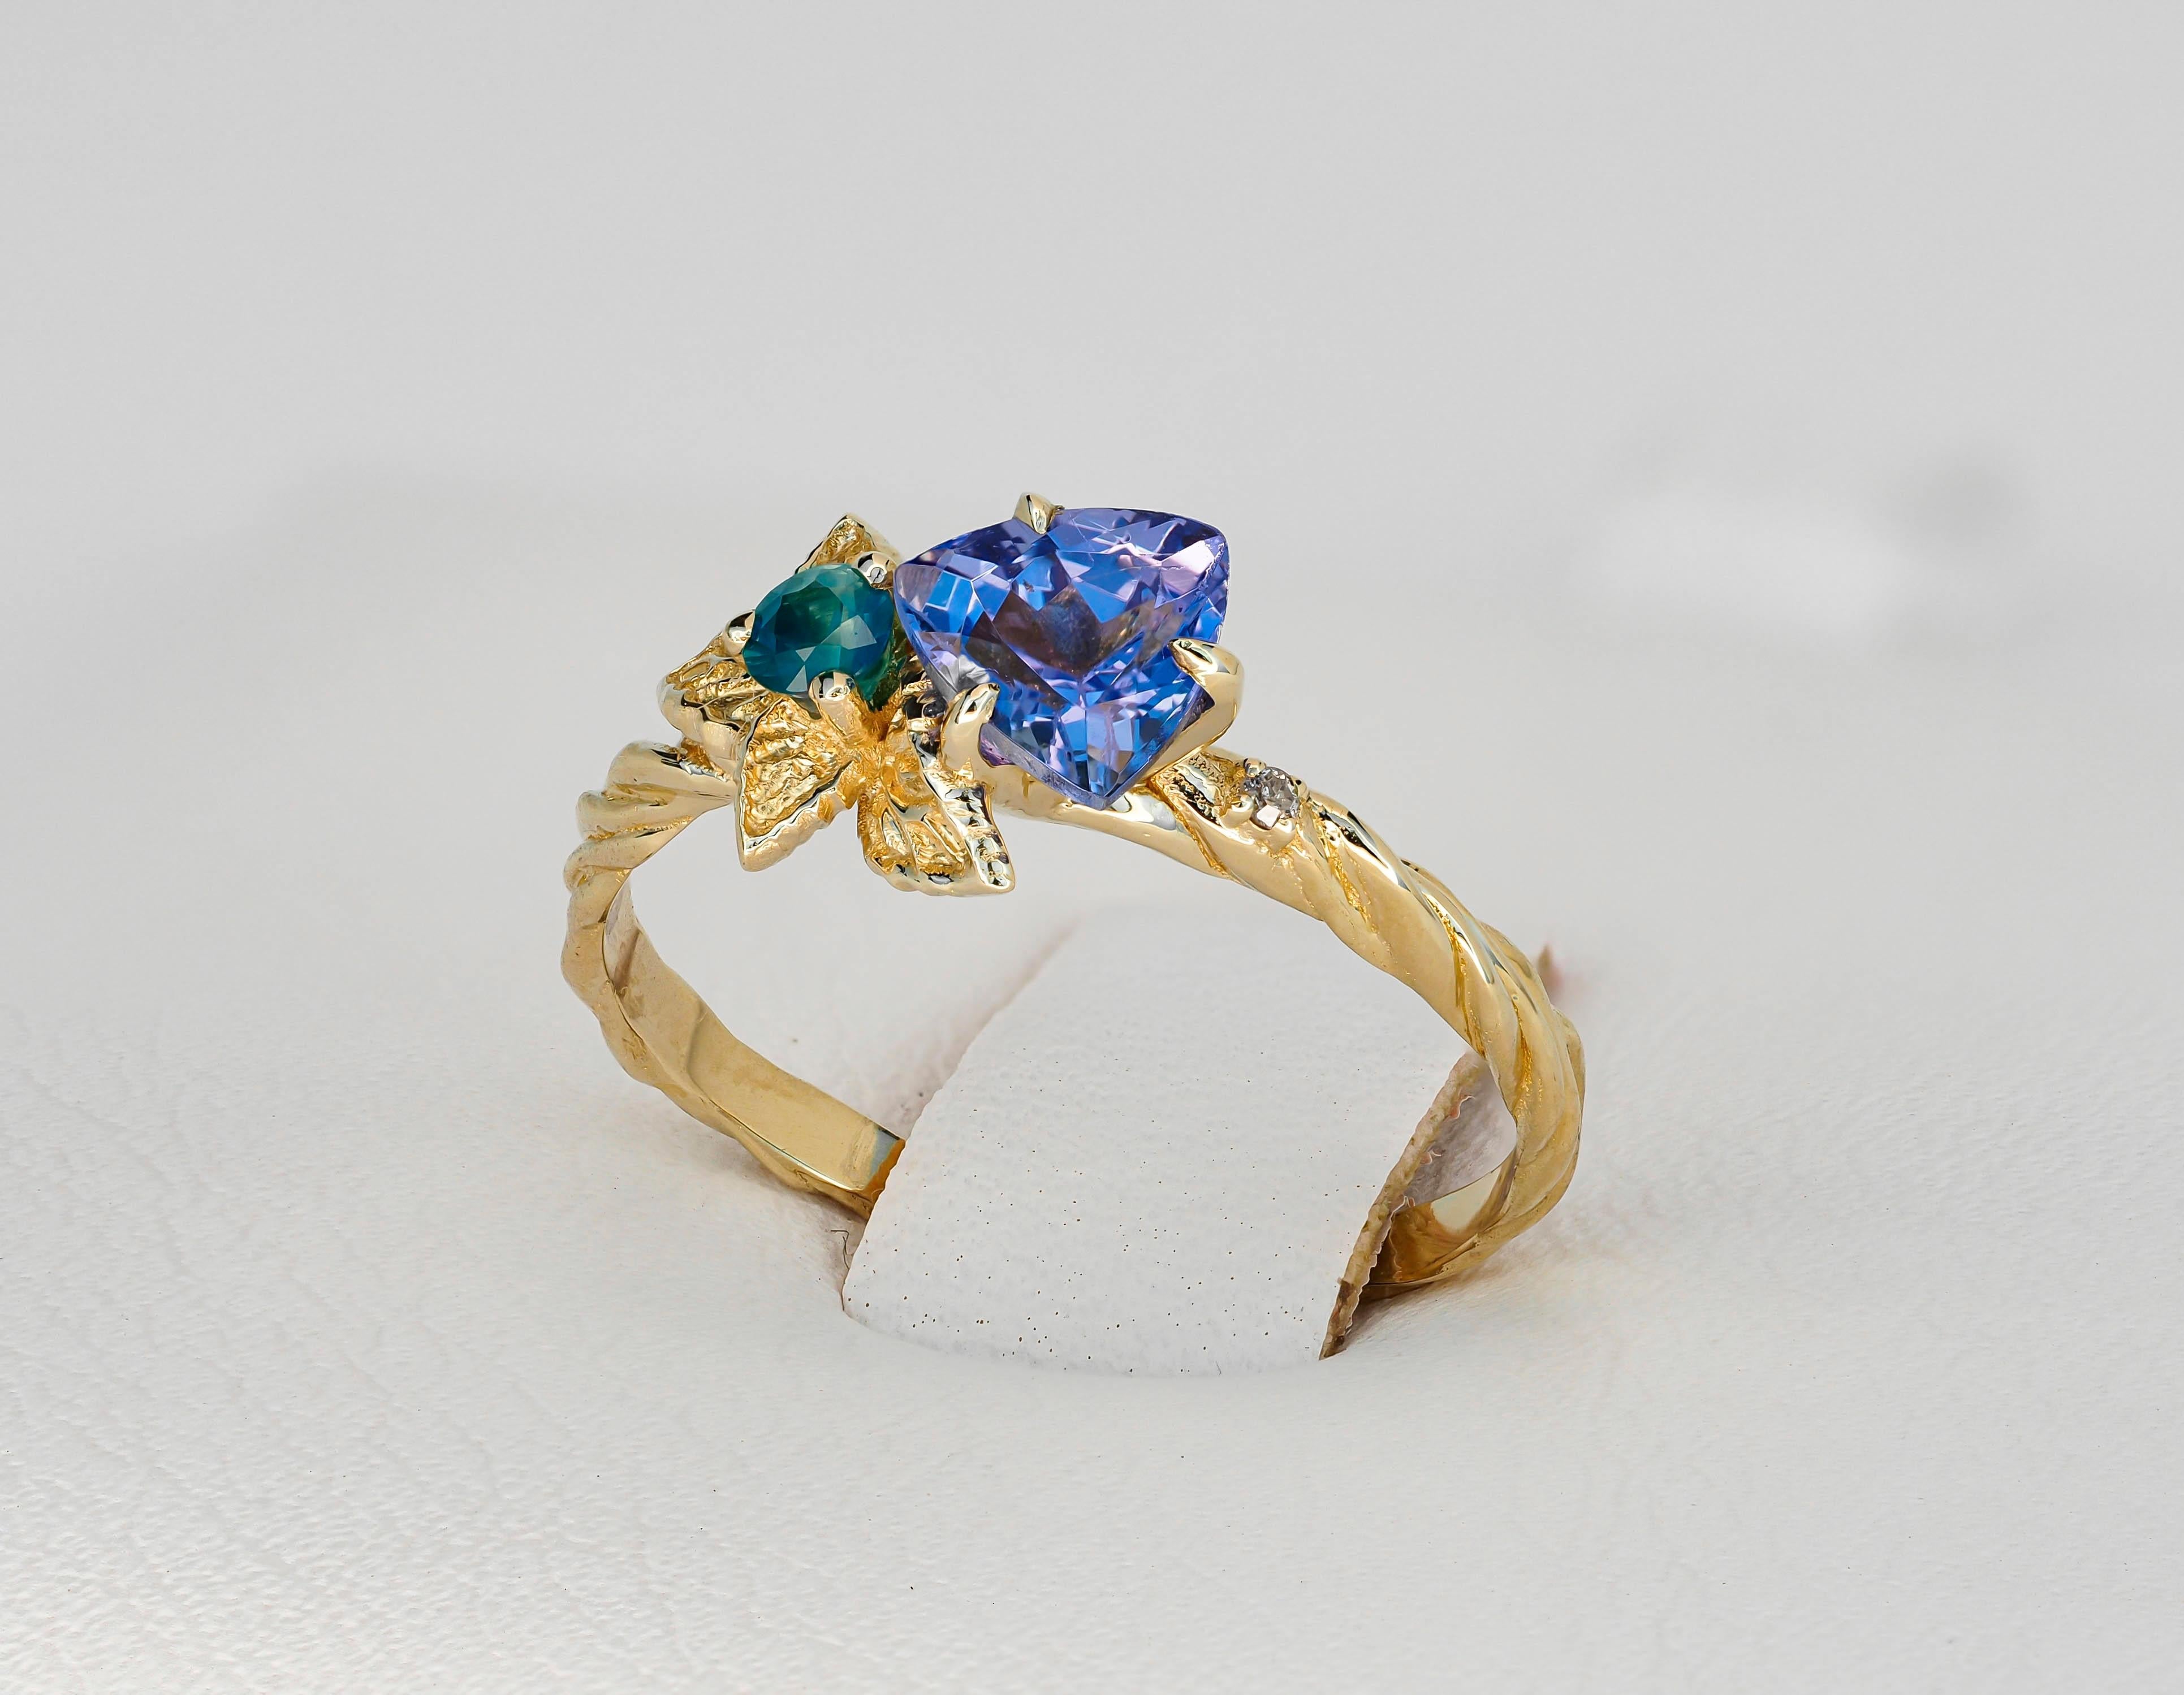 For Sale:  Tanzanite and diamonds 14k gold ring. Flower design ring with tanzanite. 11